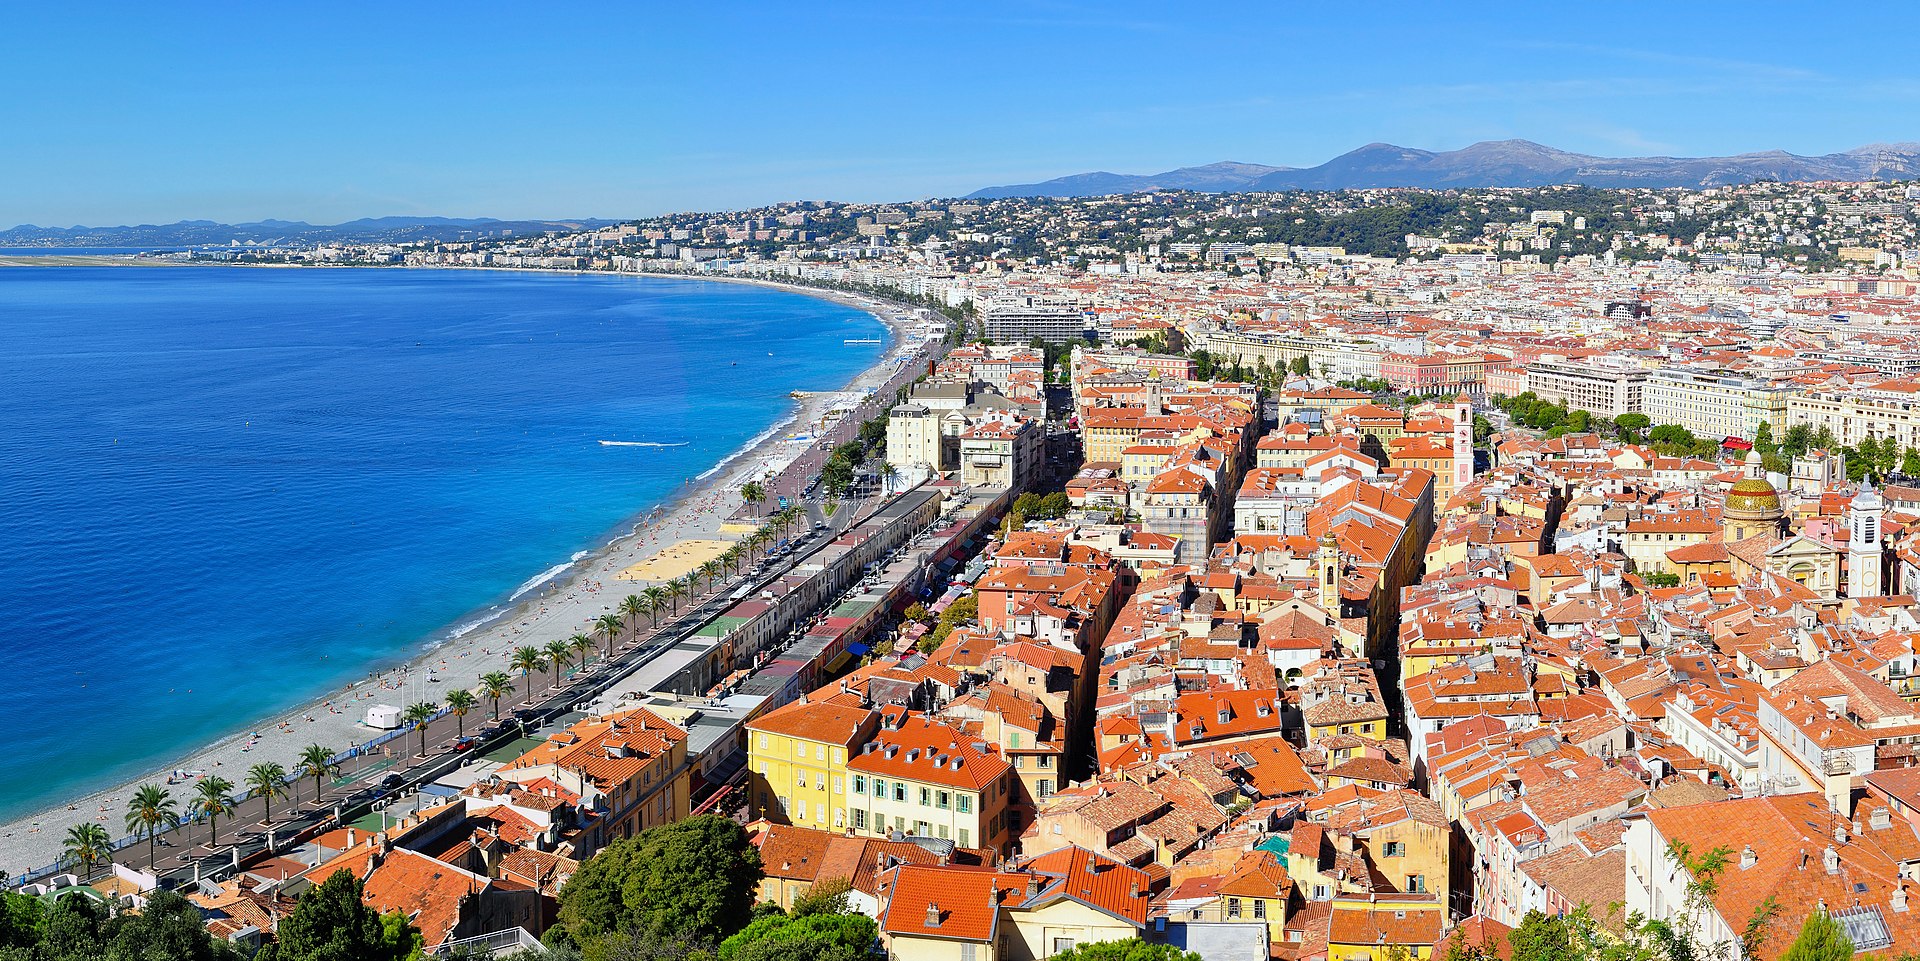 Panoramic view of the old city and the Promenade des Anglais in Nice, on the French Riviera